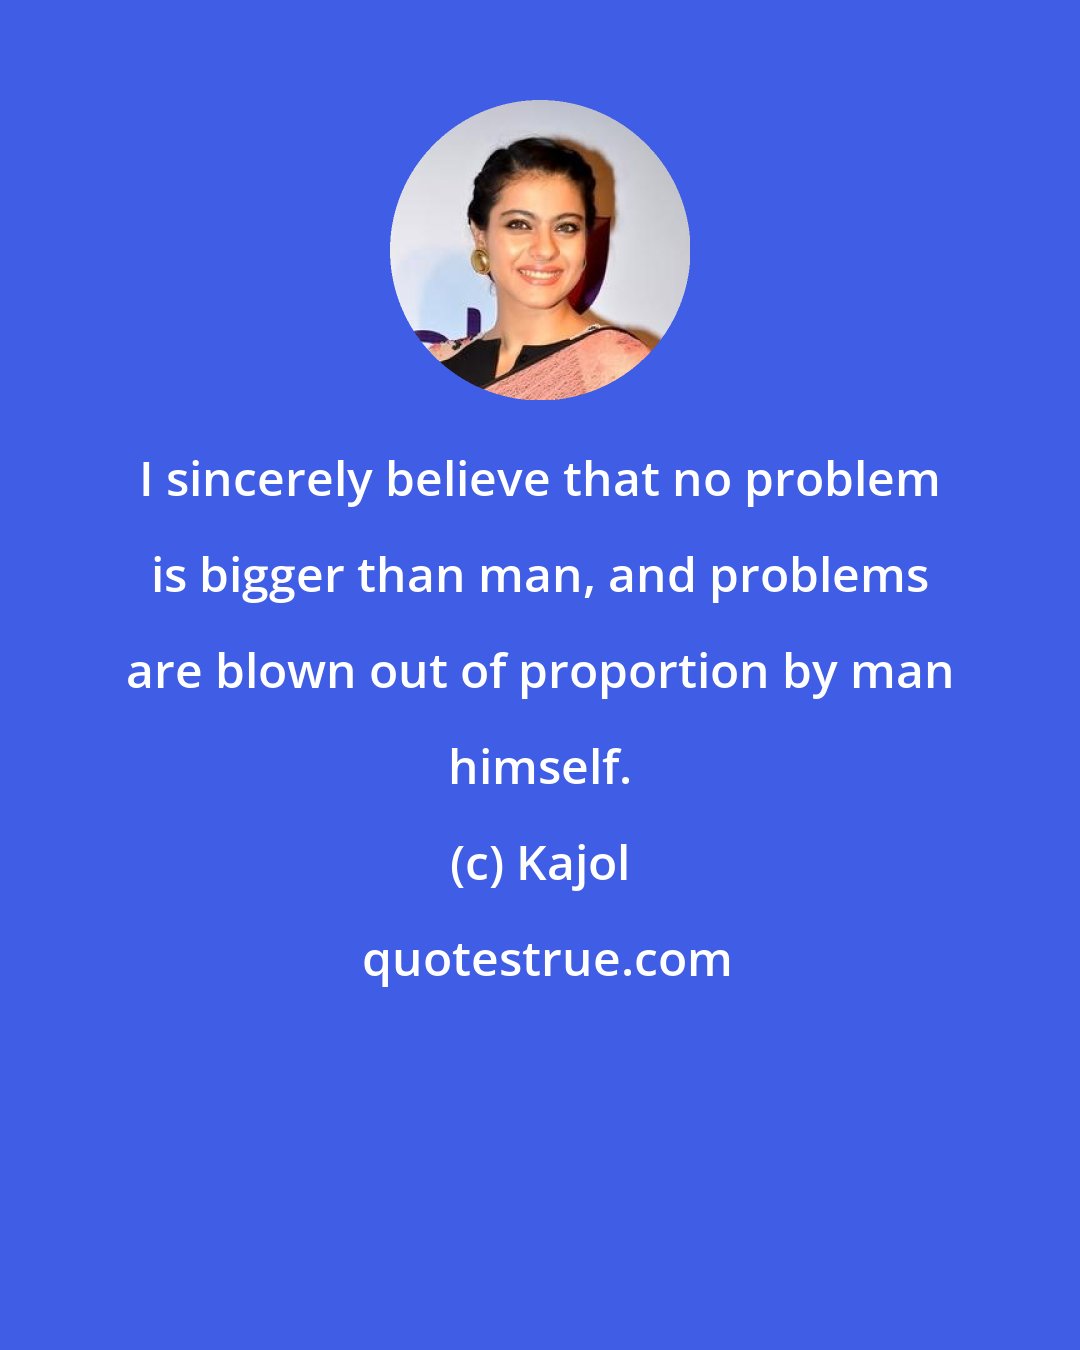 Kajol: I sincerely believe that no problem is bigger than man, and problems are blown out of proportion by man himself.